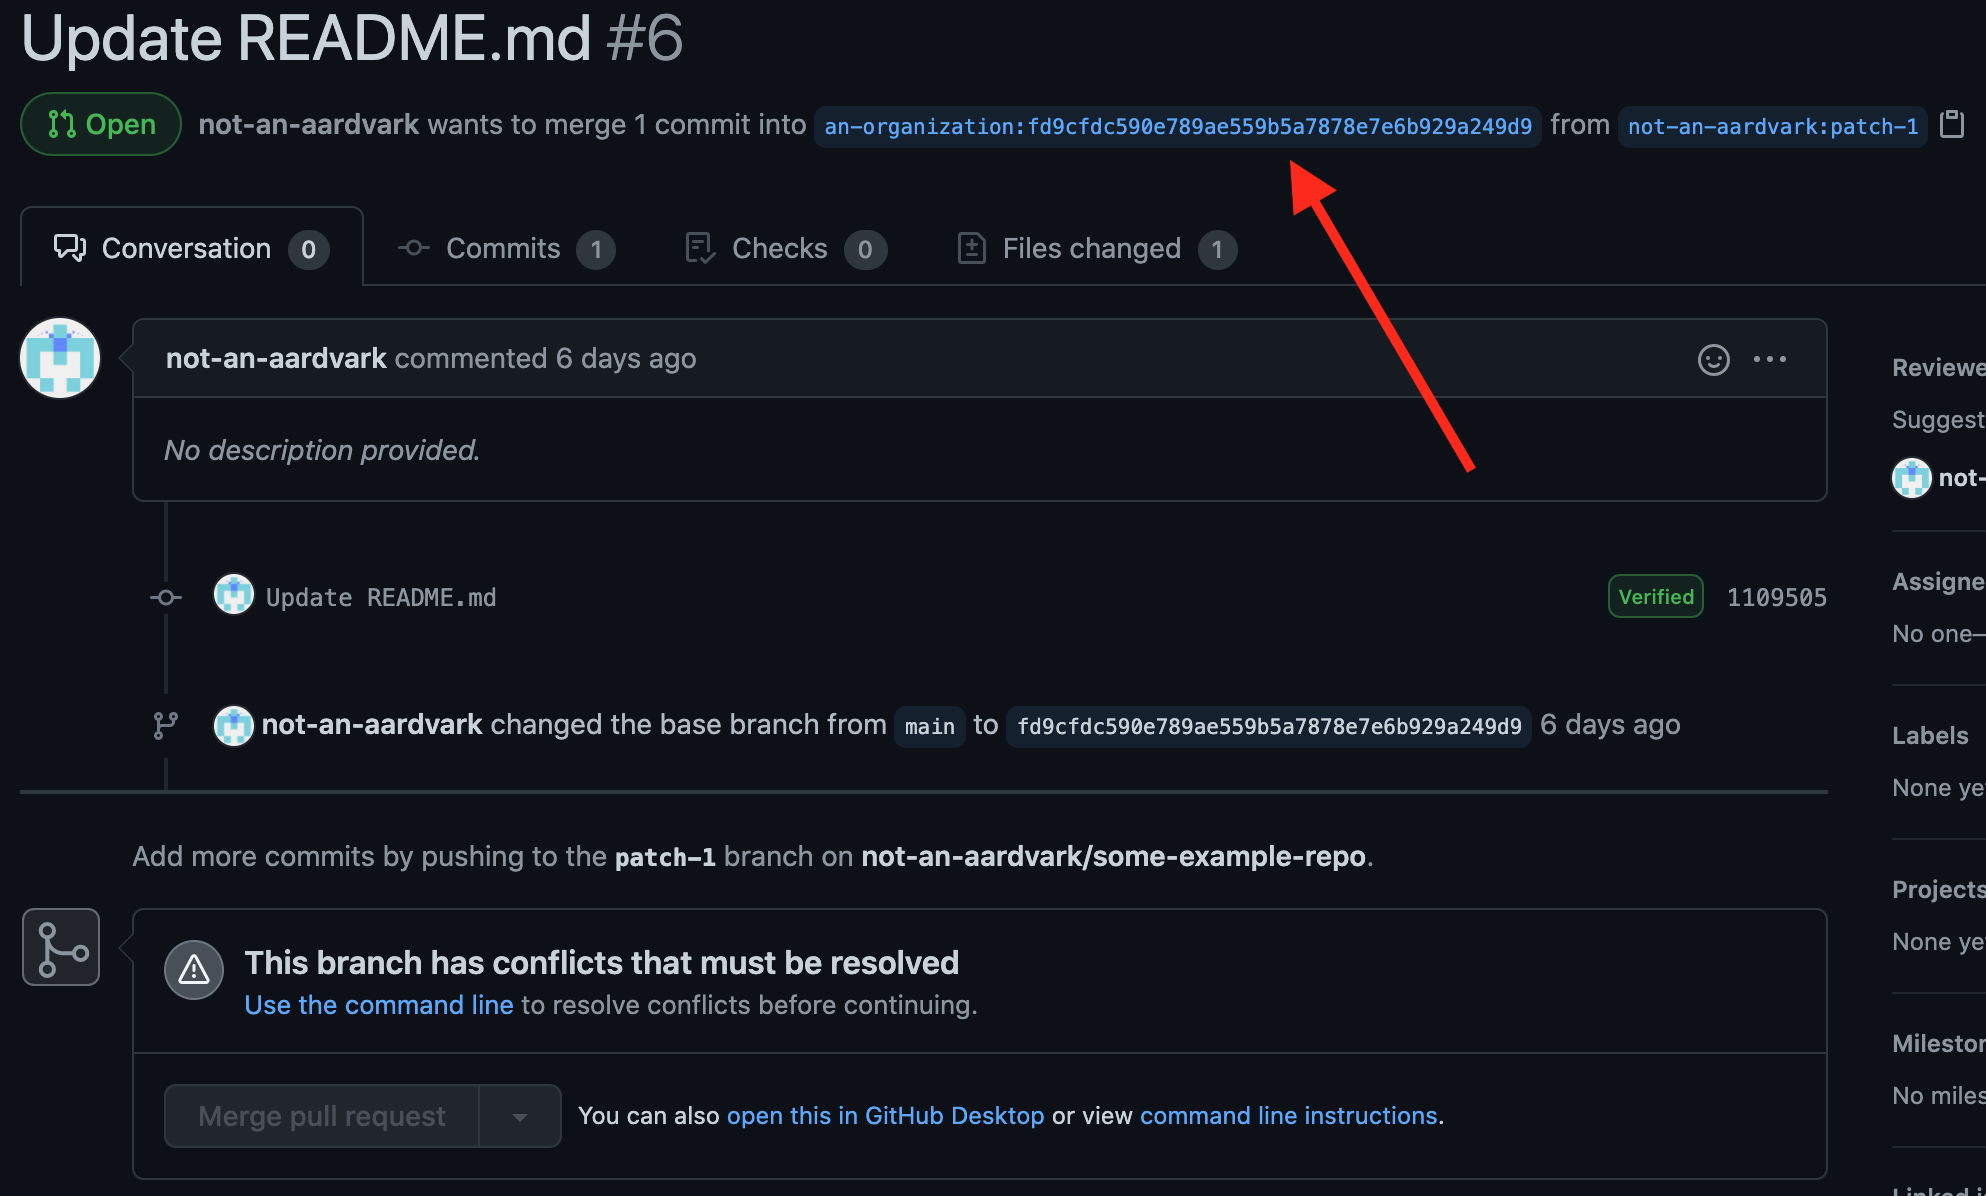 A screenshot of a GitHub pull request. The title is "Update README.md". The pull request is in an "open" state, and at the top it says, "not-an-aardvark wants to merge 1 commit into an-organization:fd9cfdc590e789ae559b5a7878e7e6b929a249d9 from not-an-aardvark:patch-1". The screenshot is annotated with a red arrow pointing to the middle of that sentence. Further down, the screenshot indicates that the pull request was created 6 days ago and has no description provided. There is one commit, "Update README.md". Below the commit, an event is displayed: "not-an-aardvark changed the base branch from 'main' to 'fd9cfdc590e789ae559b5a7878e7e6b929a249d9'". At the bottom, there is a "Merge pull request" button, which is disabled. The message above it says, "This branch has conflicts that must be resolved".